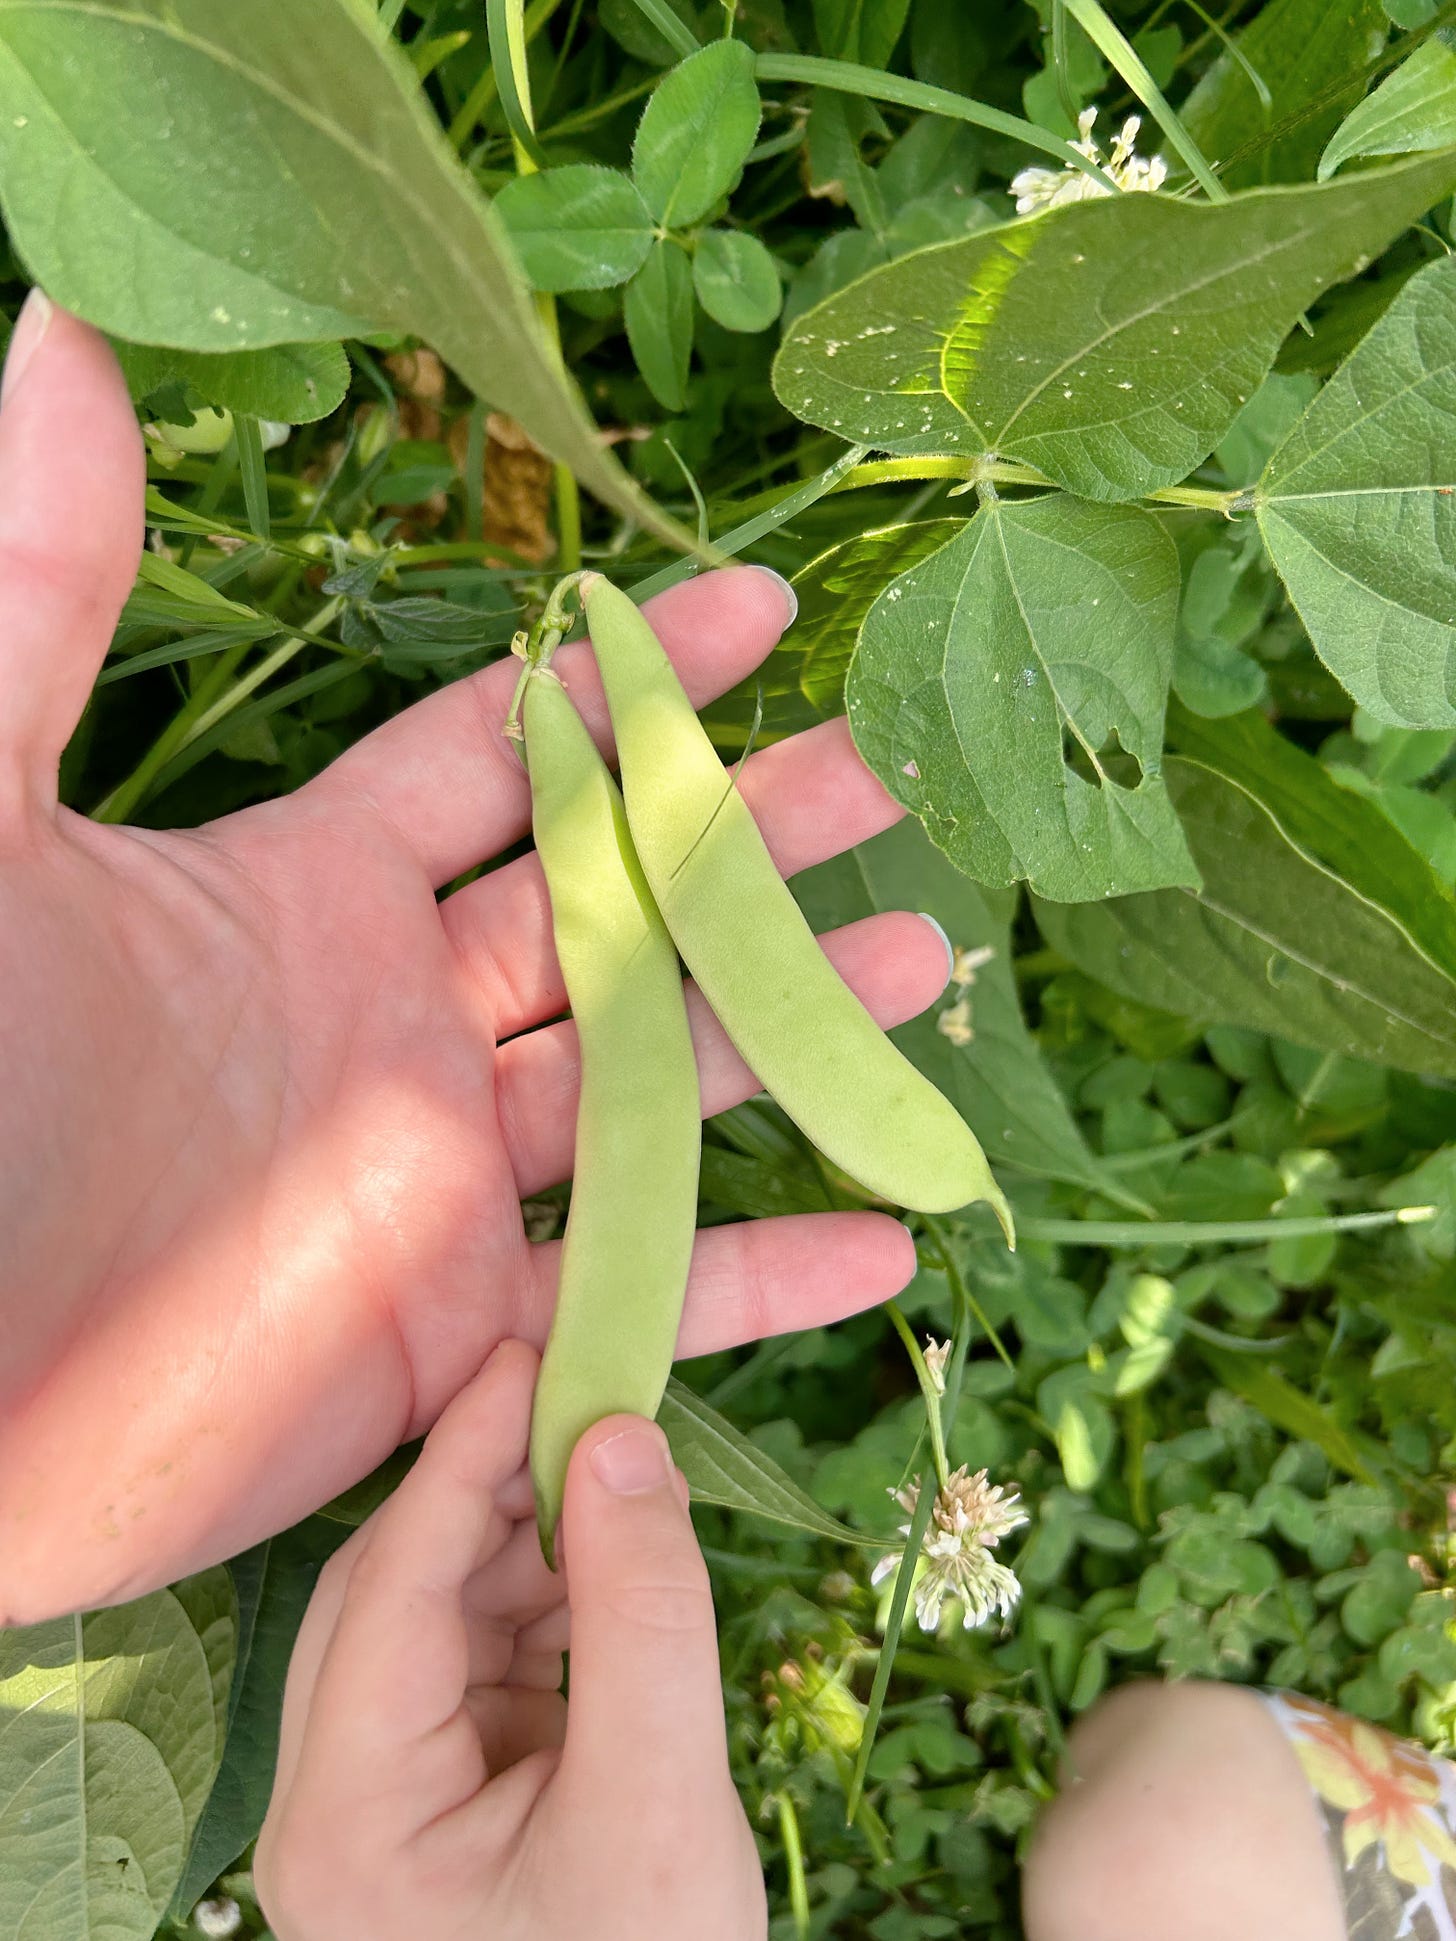 My pale hand and my child's touching two pinto bean pods.